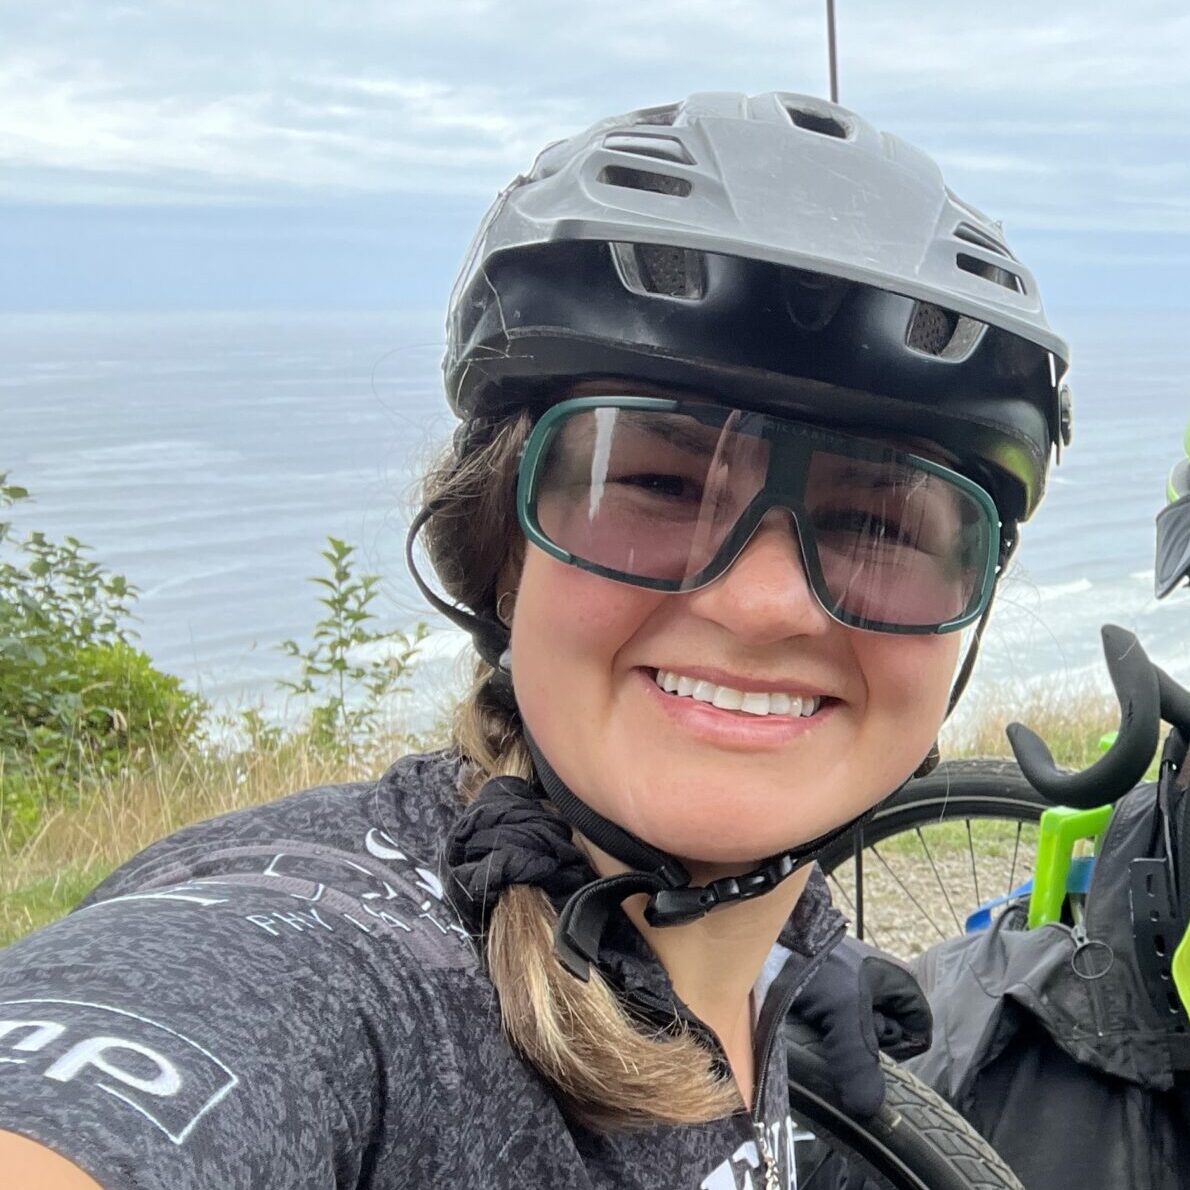 Hayley wearing light tinted sunglasses, hair in a braid with a grey helmet.